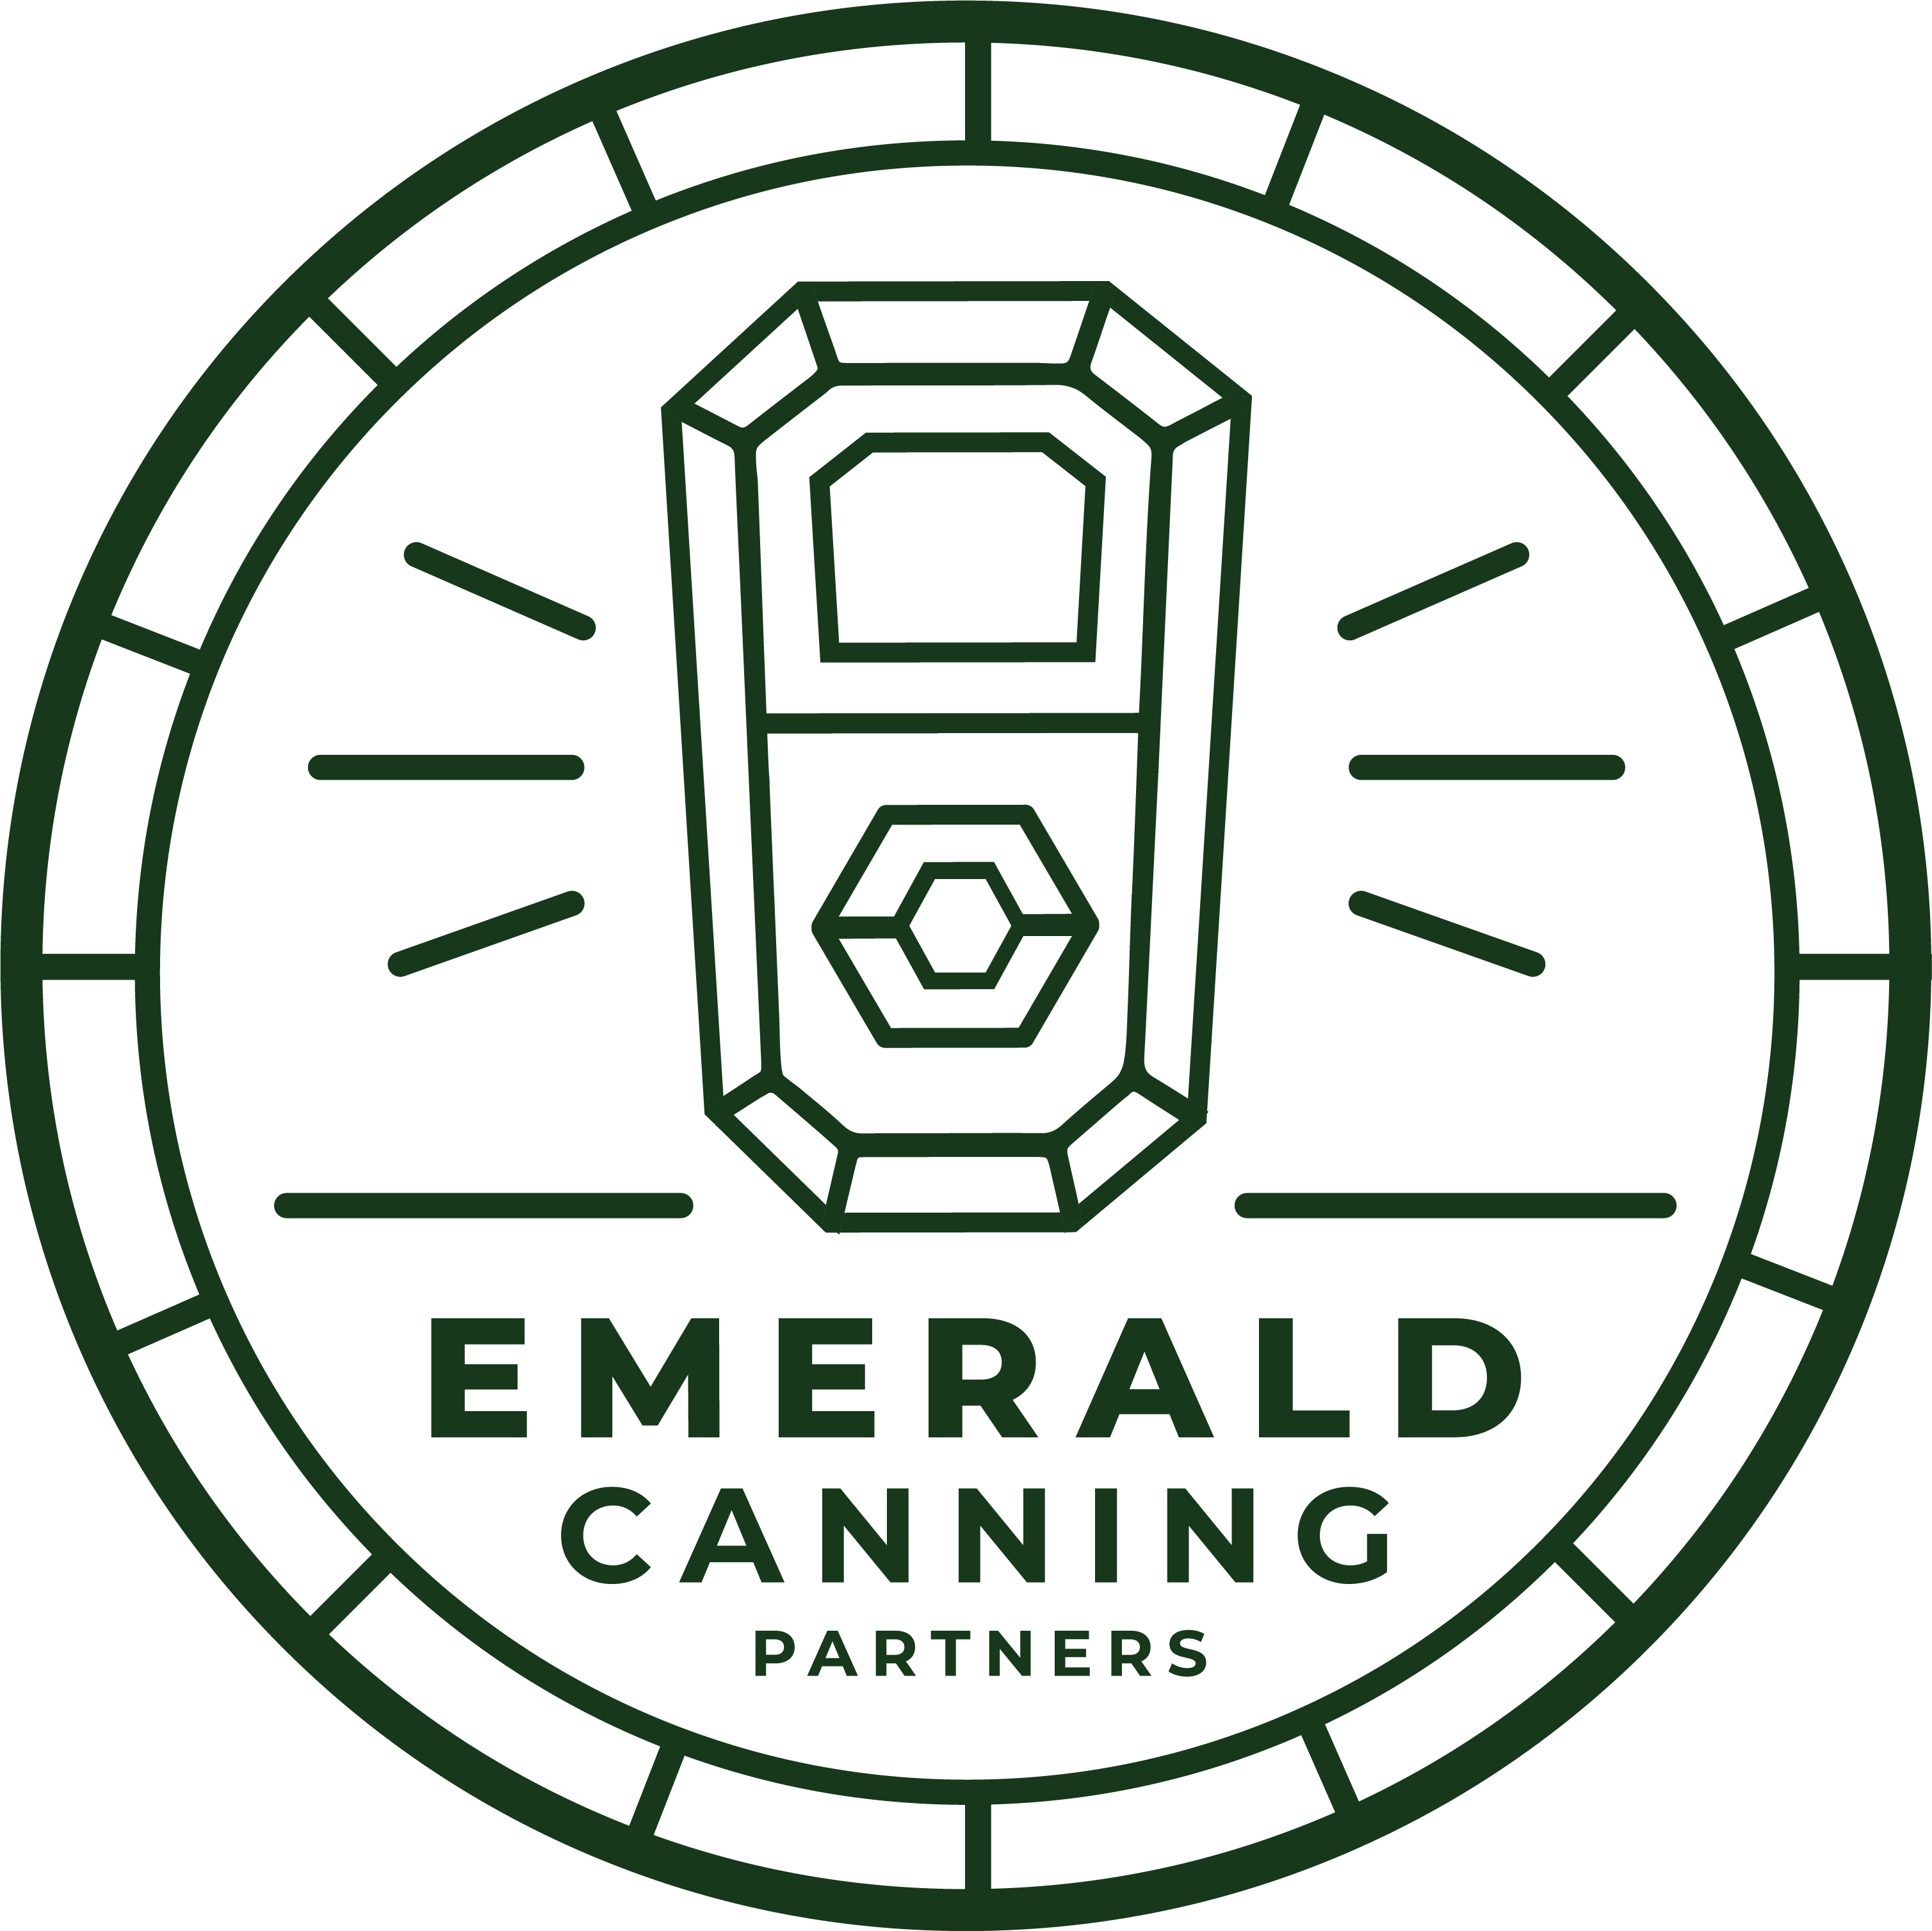 Emerald Canning Partners